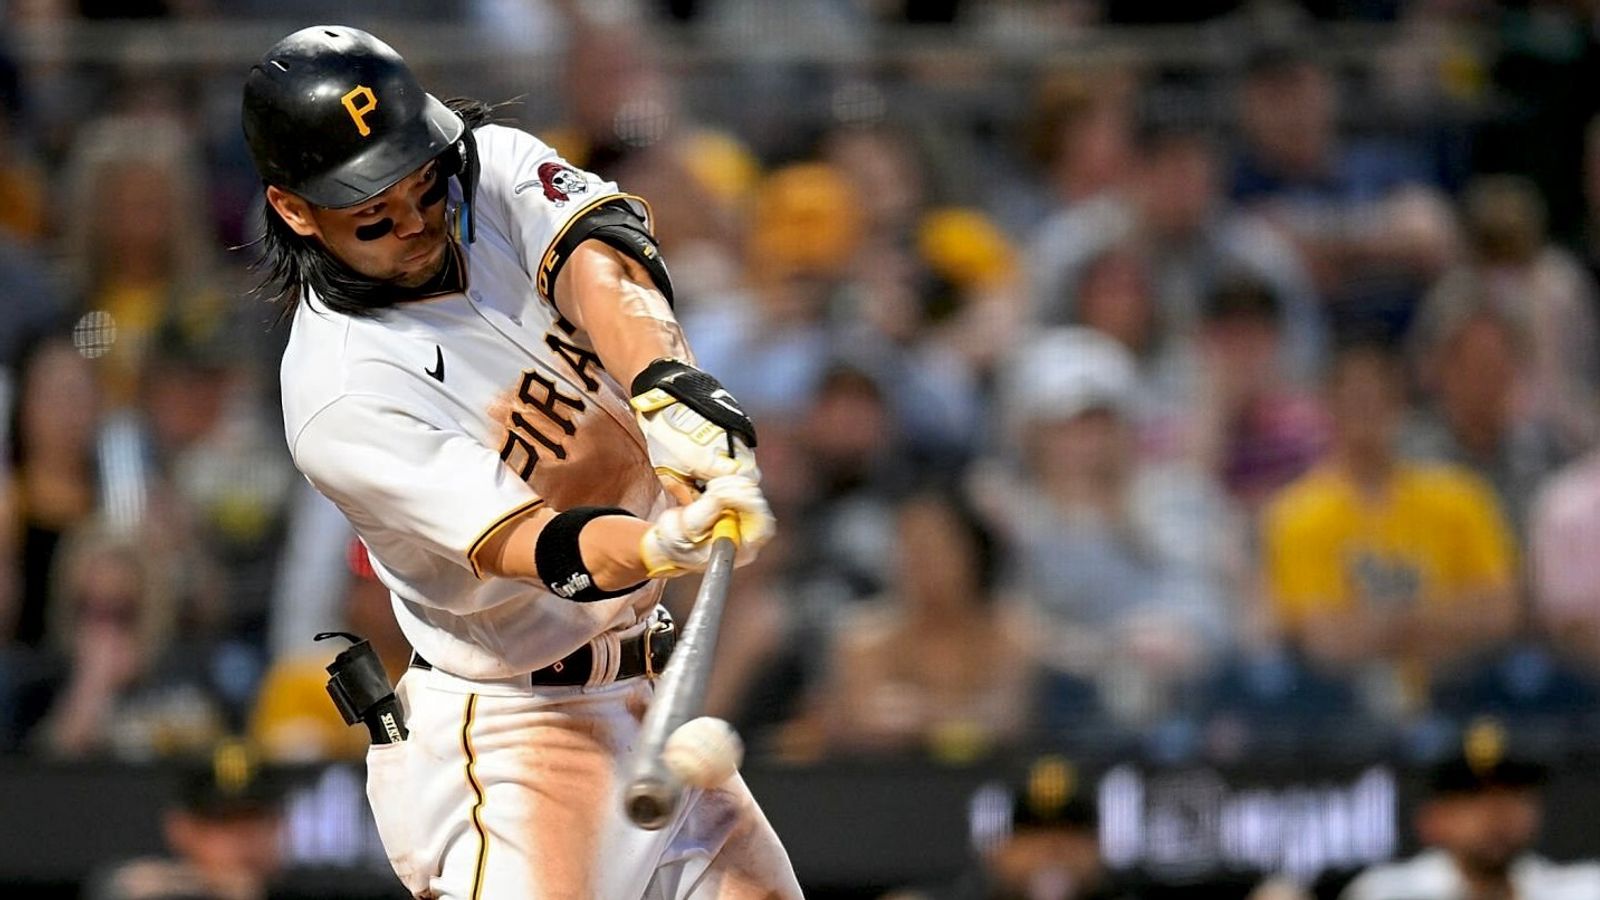 Pirates Freeze Frame Connor Joe's doing more than just hit